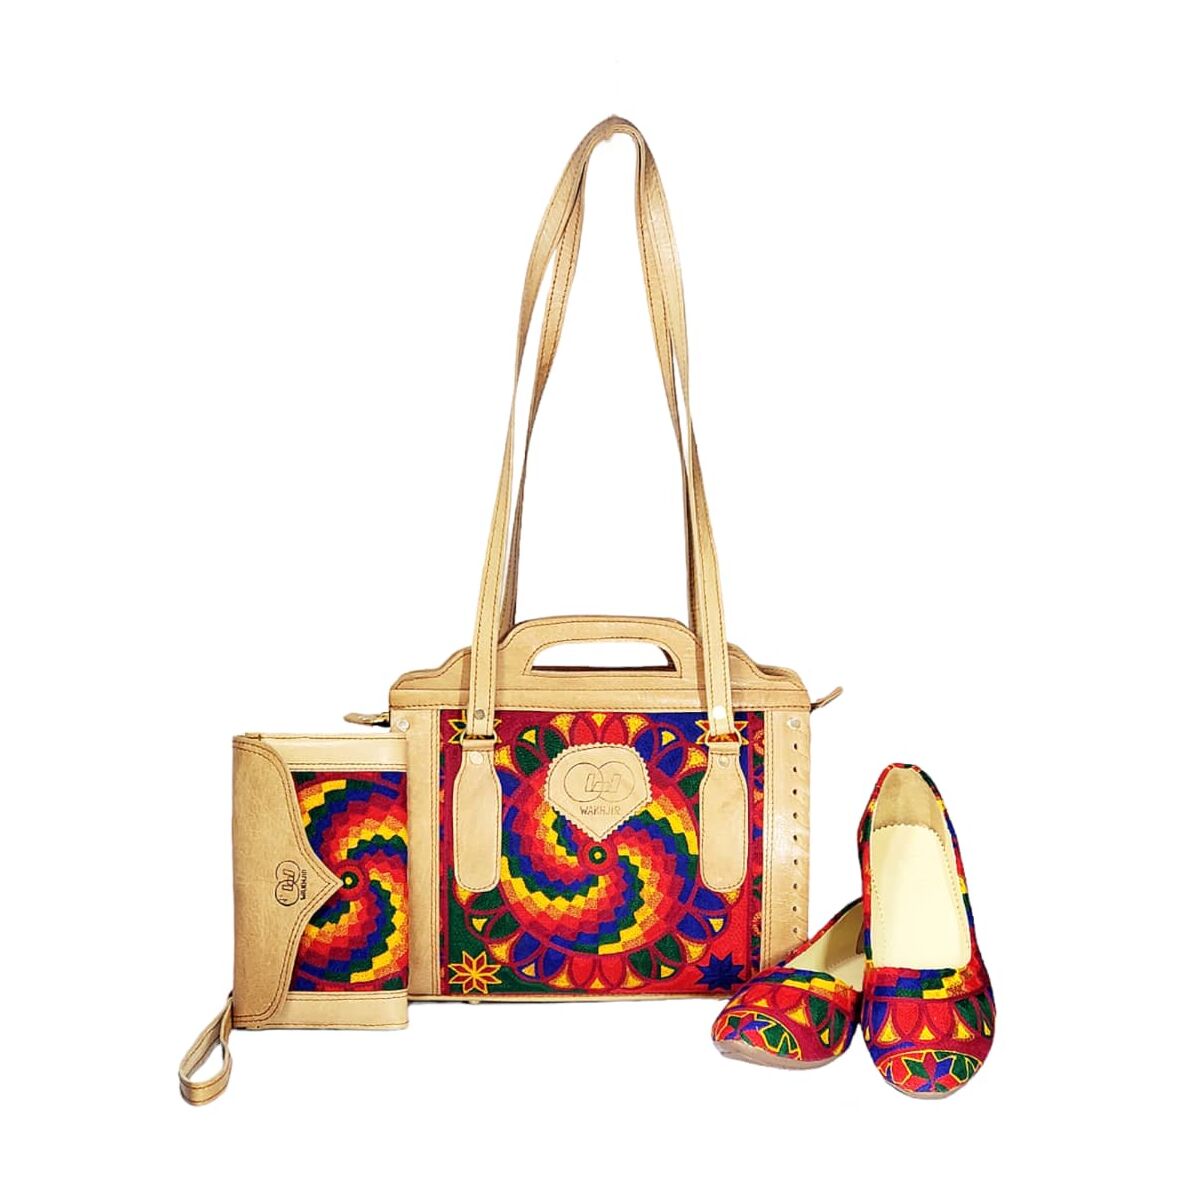 2022 Bolsos Matching Birdies Shoes And Kurt Geiger Hand Bags Famous Ladies  Purses For Women From Allx01, $39.06 | DHgate.Com